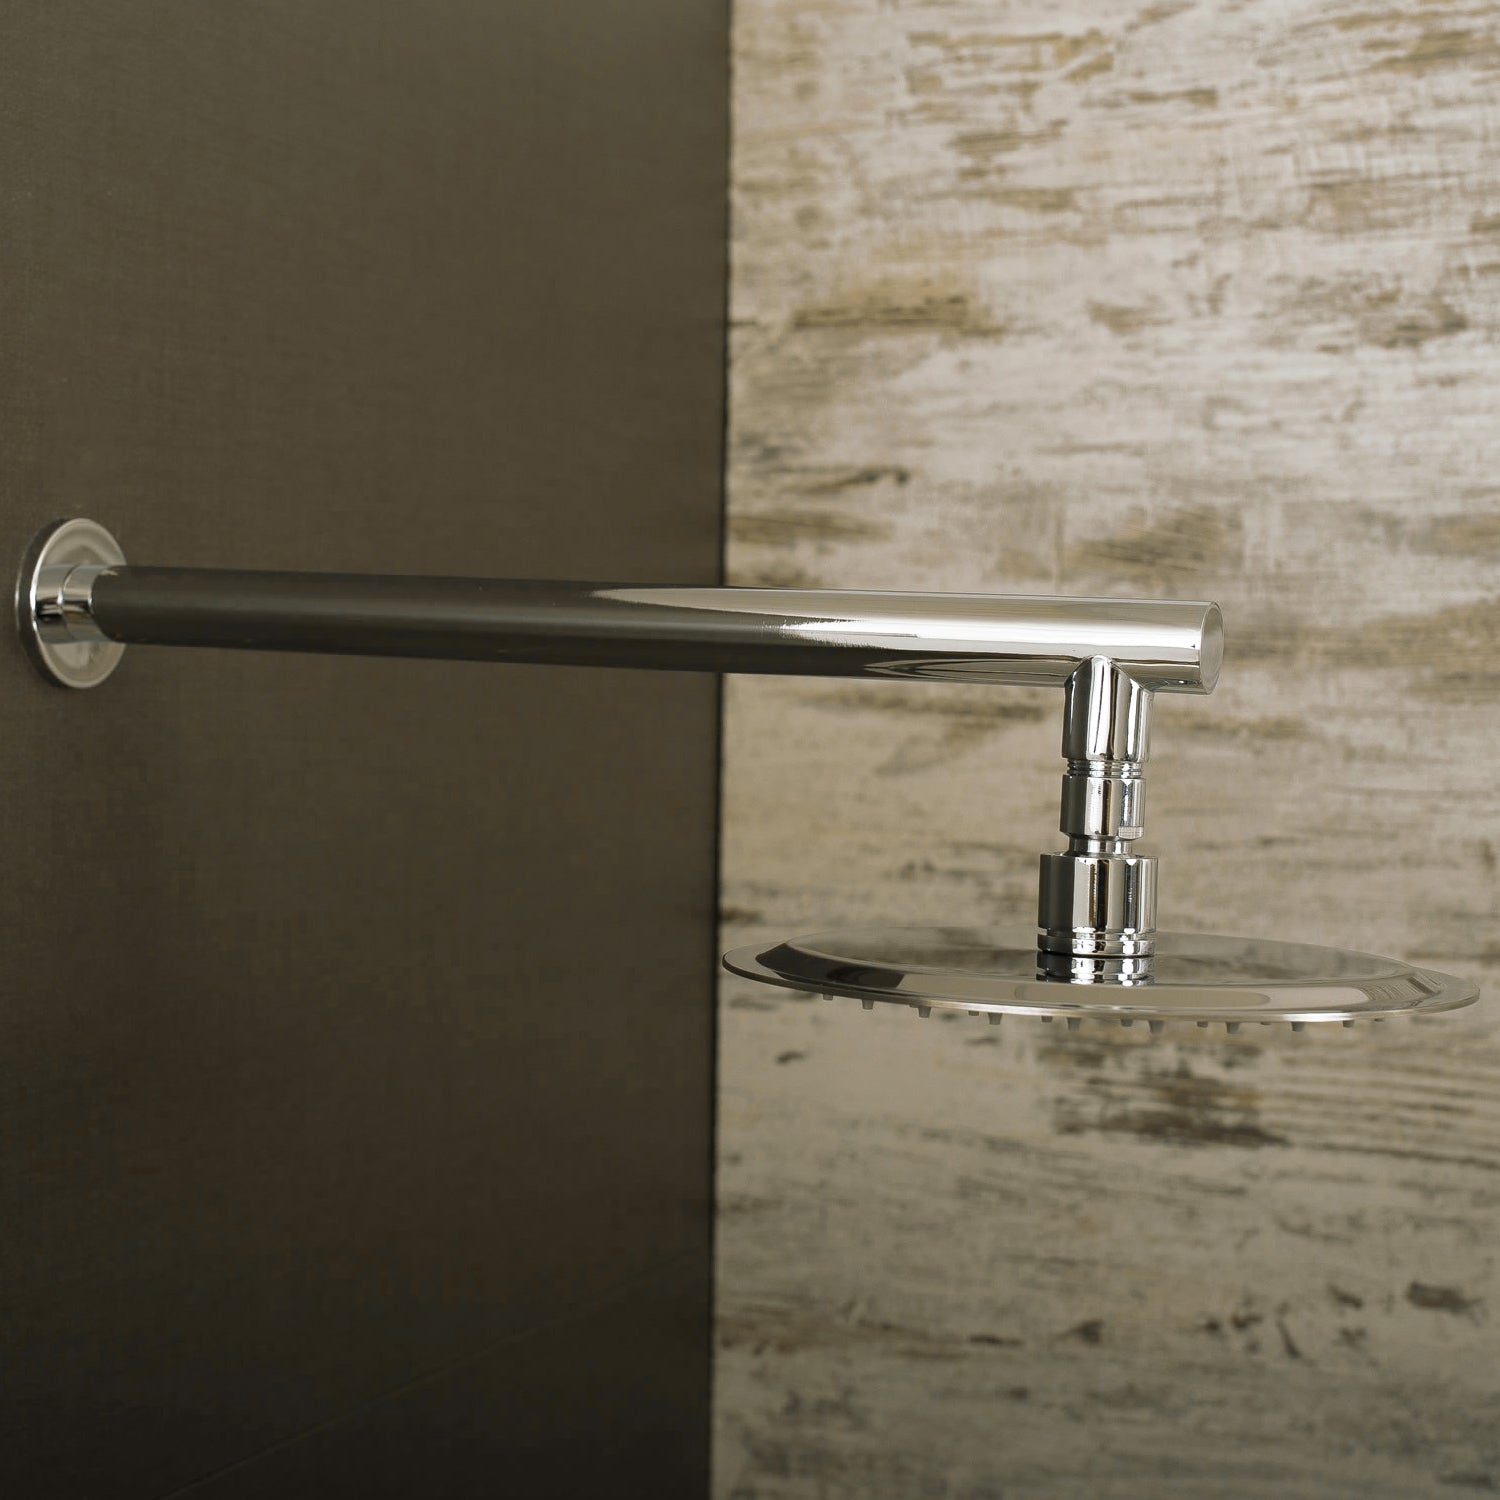 DAX Round Shower Arm, Brass Body, Wall Mount, Chrome Finish, 15 Inches (D-F04-15-CR)